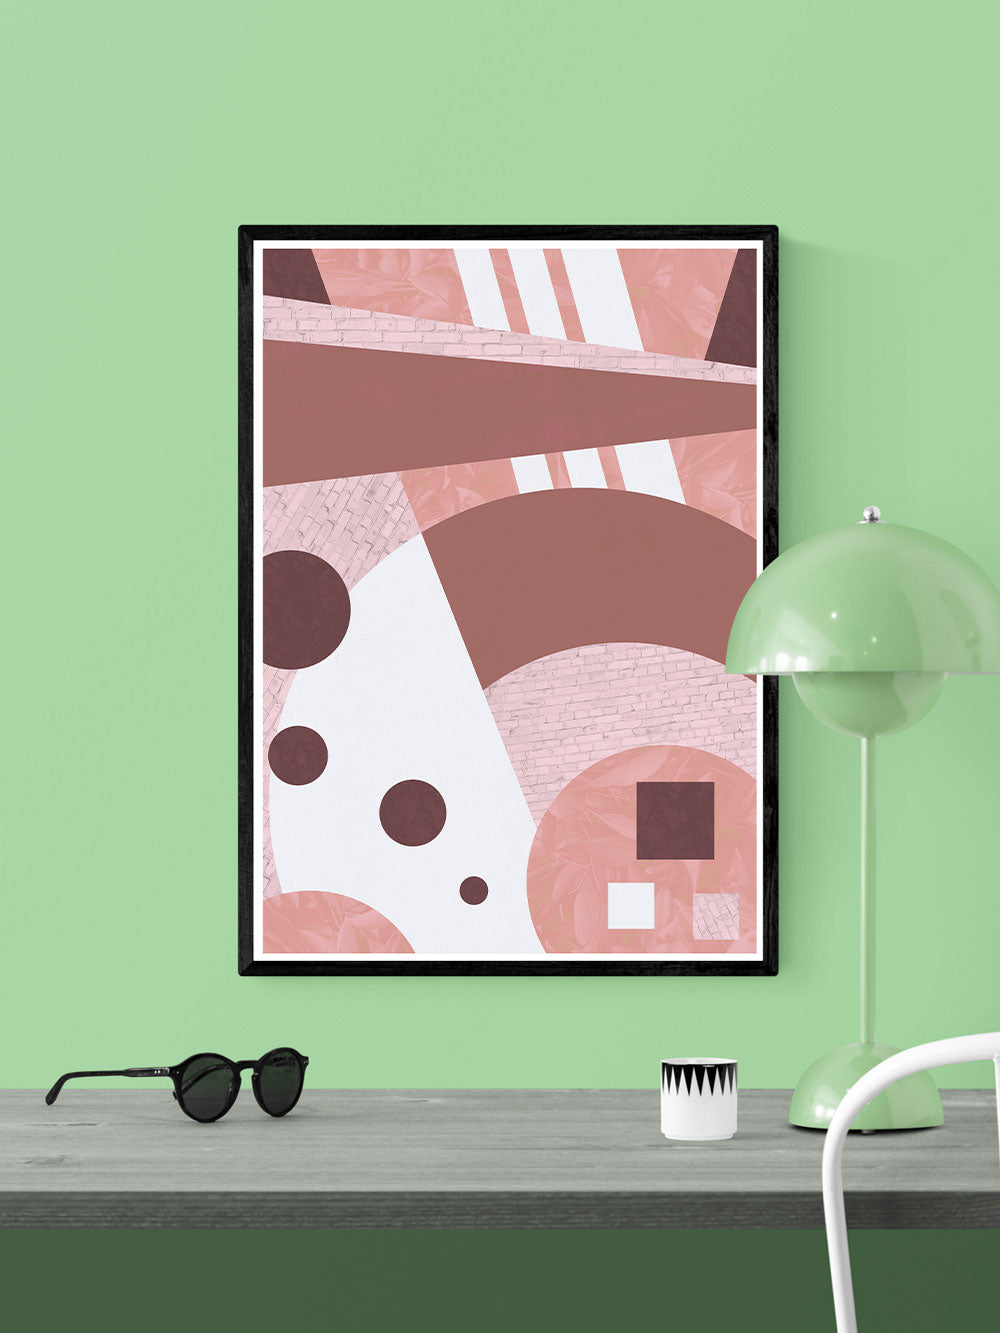 Jailhouse Rock Geometric Pattern Print in a frame on a wall